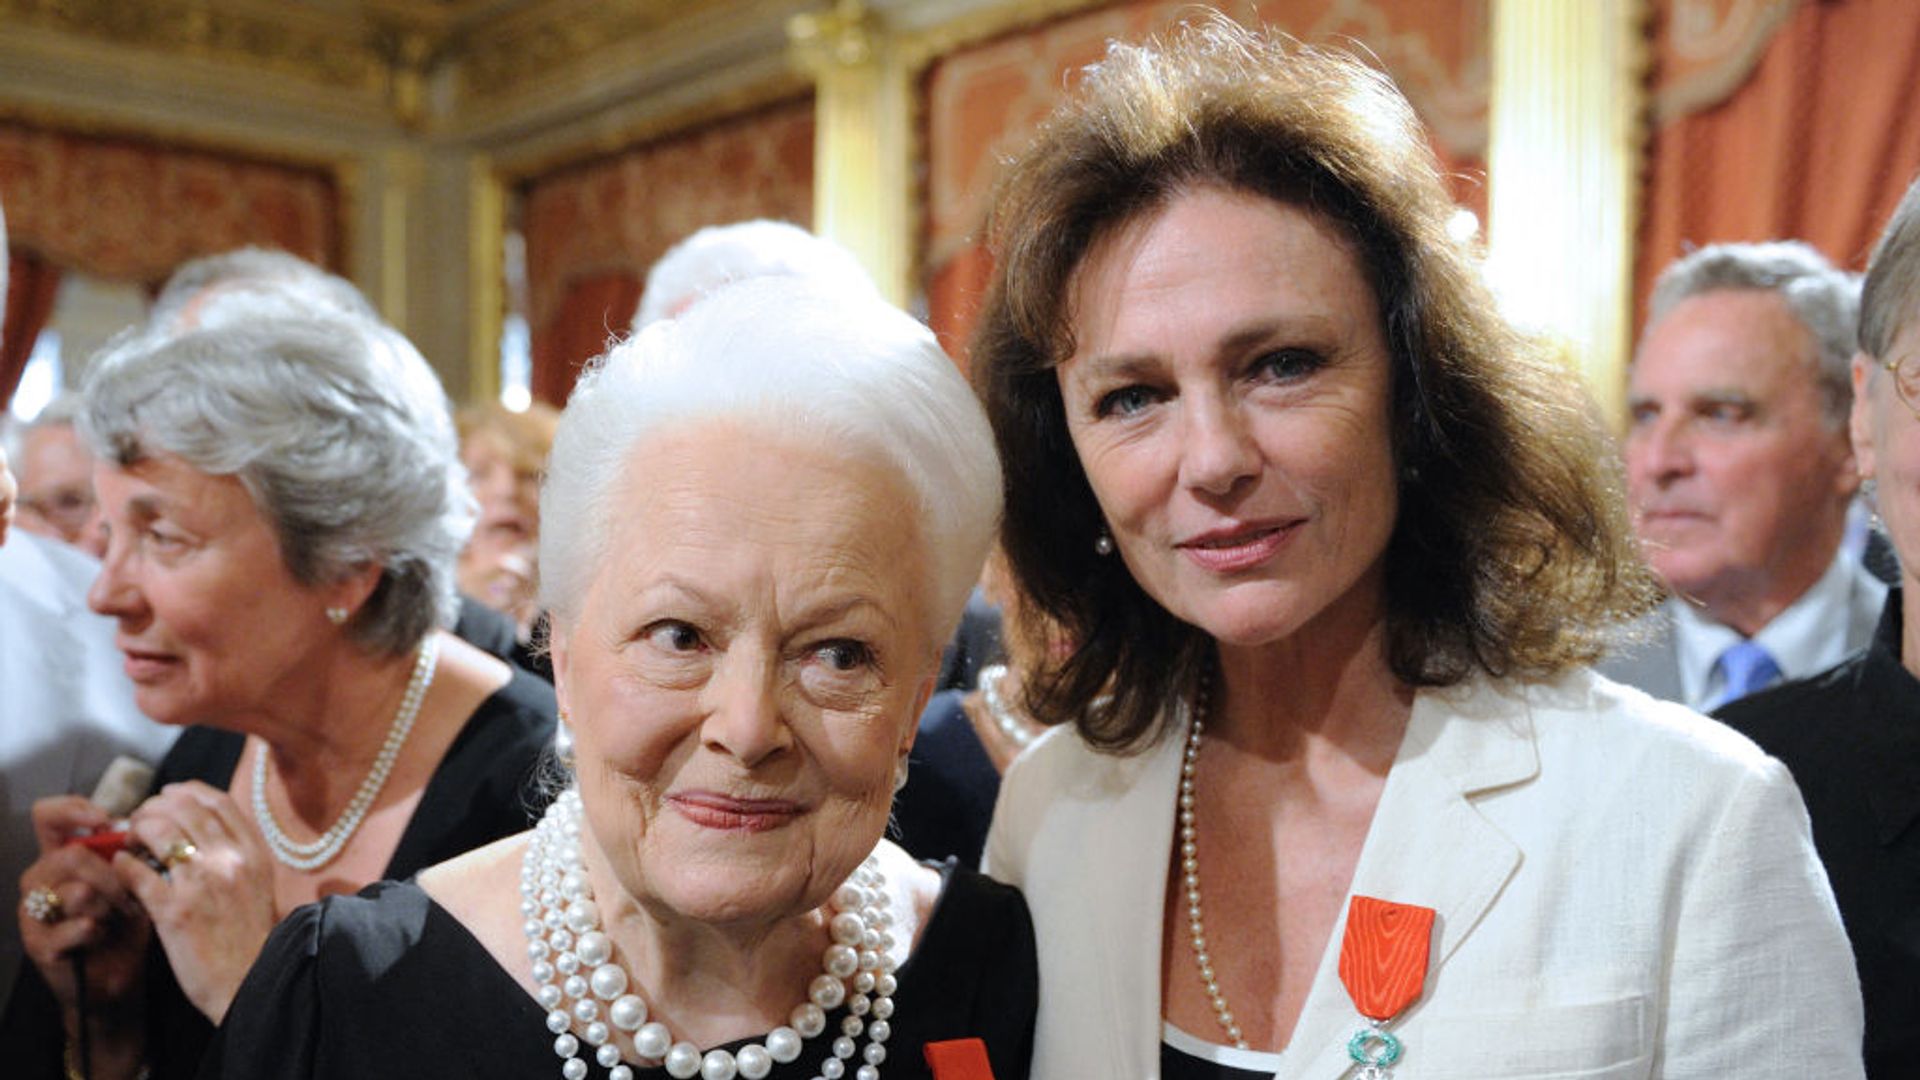 Jacqueline Bisset and Olivia de Havilland pose after they were awarded chevalier of the Legion of Honour